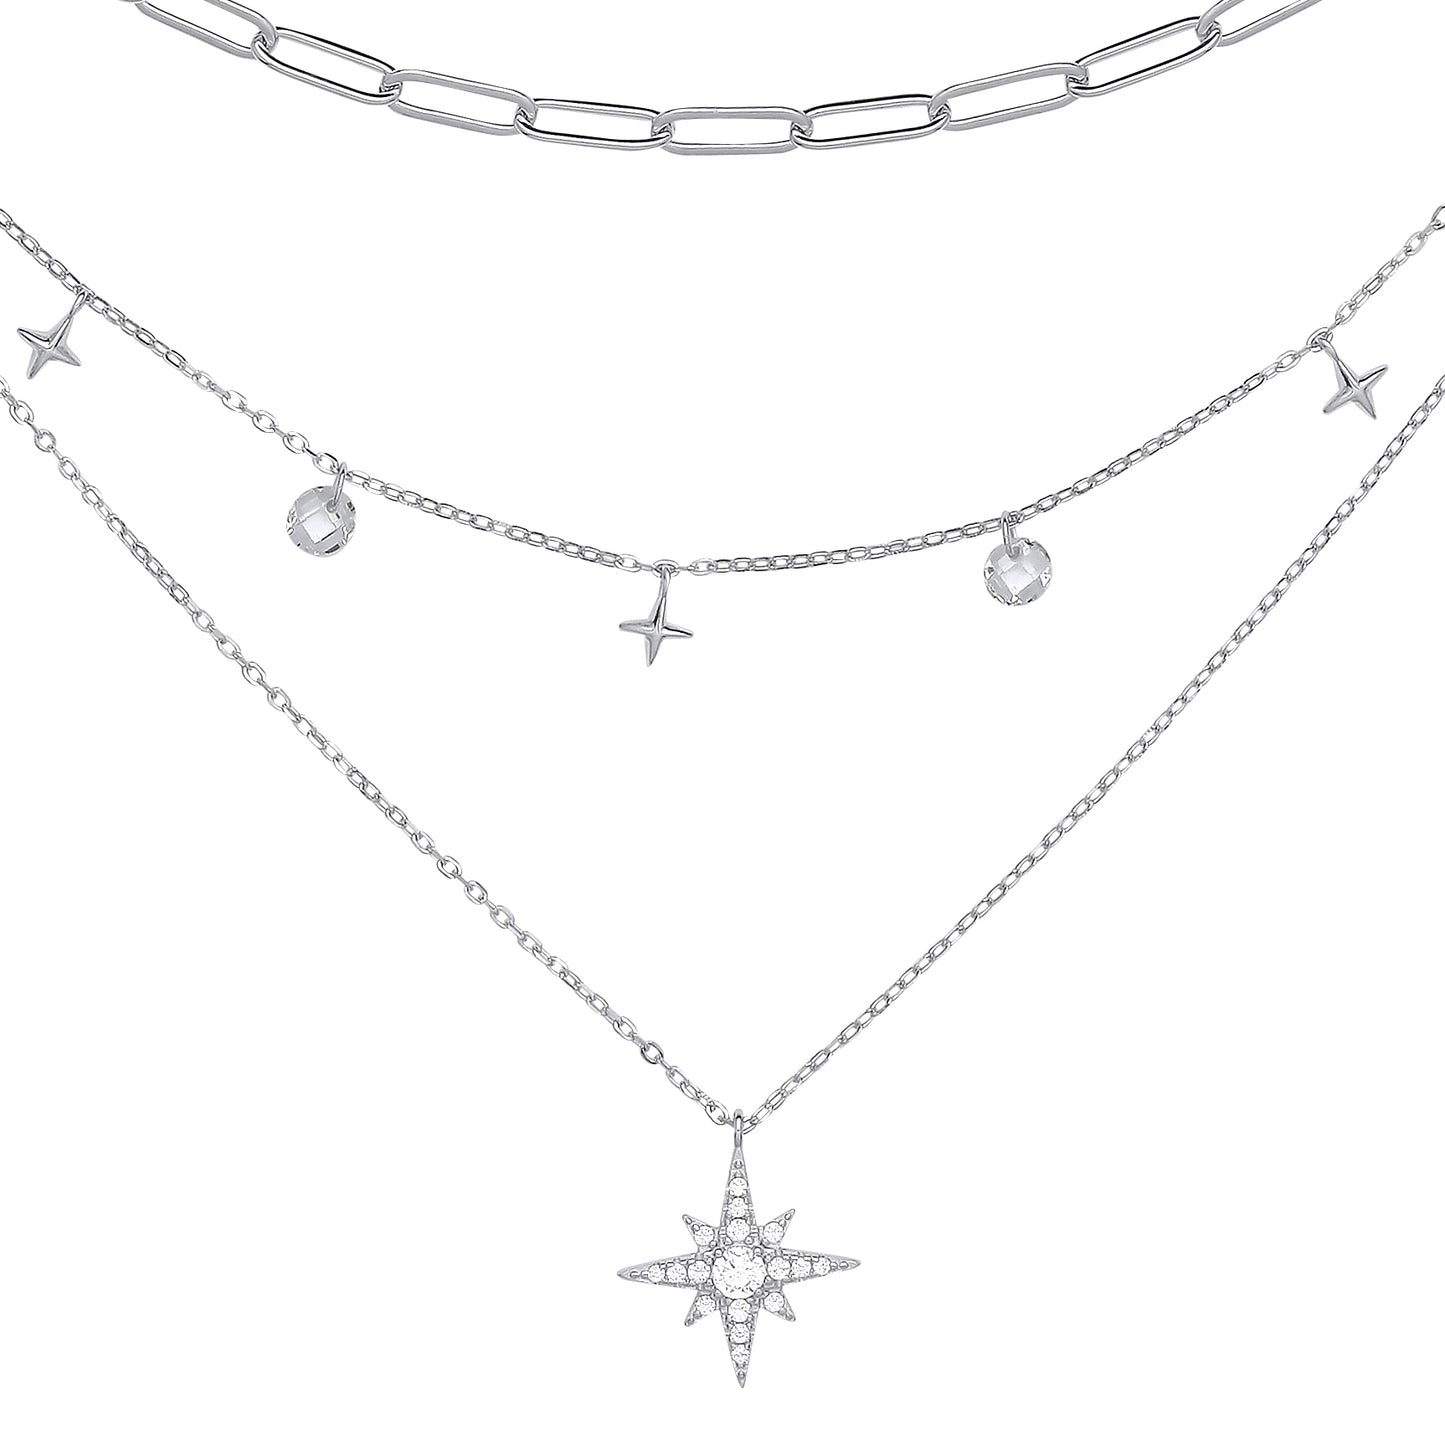 Silver  Floating Star Charms Paperclip Multi-strand Necklace - GVK373